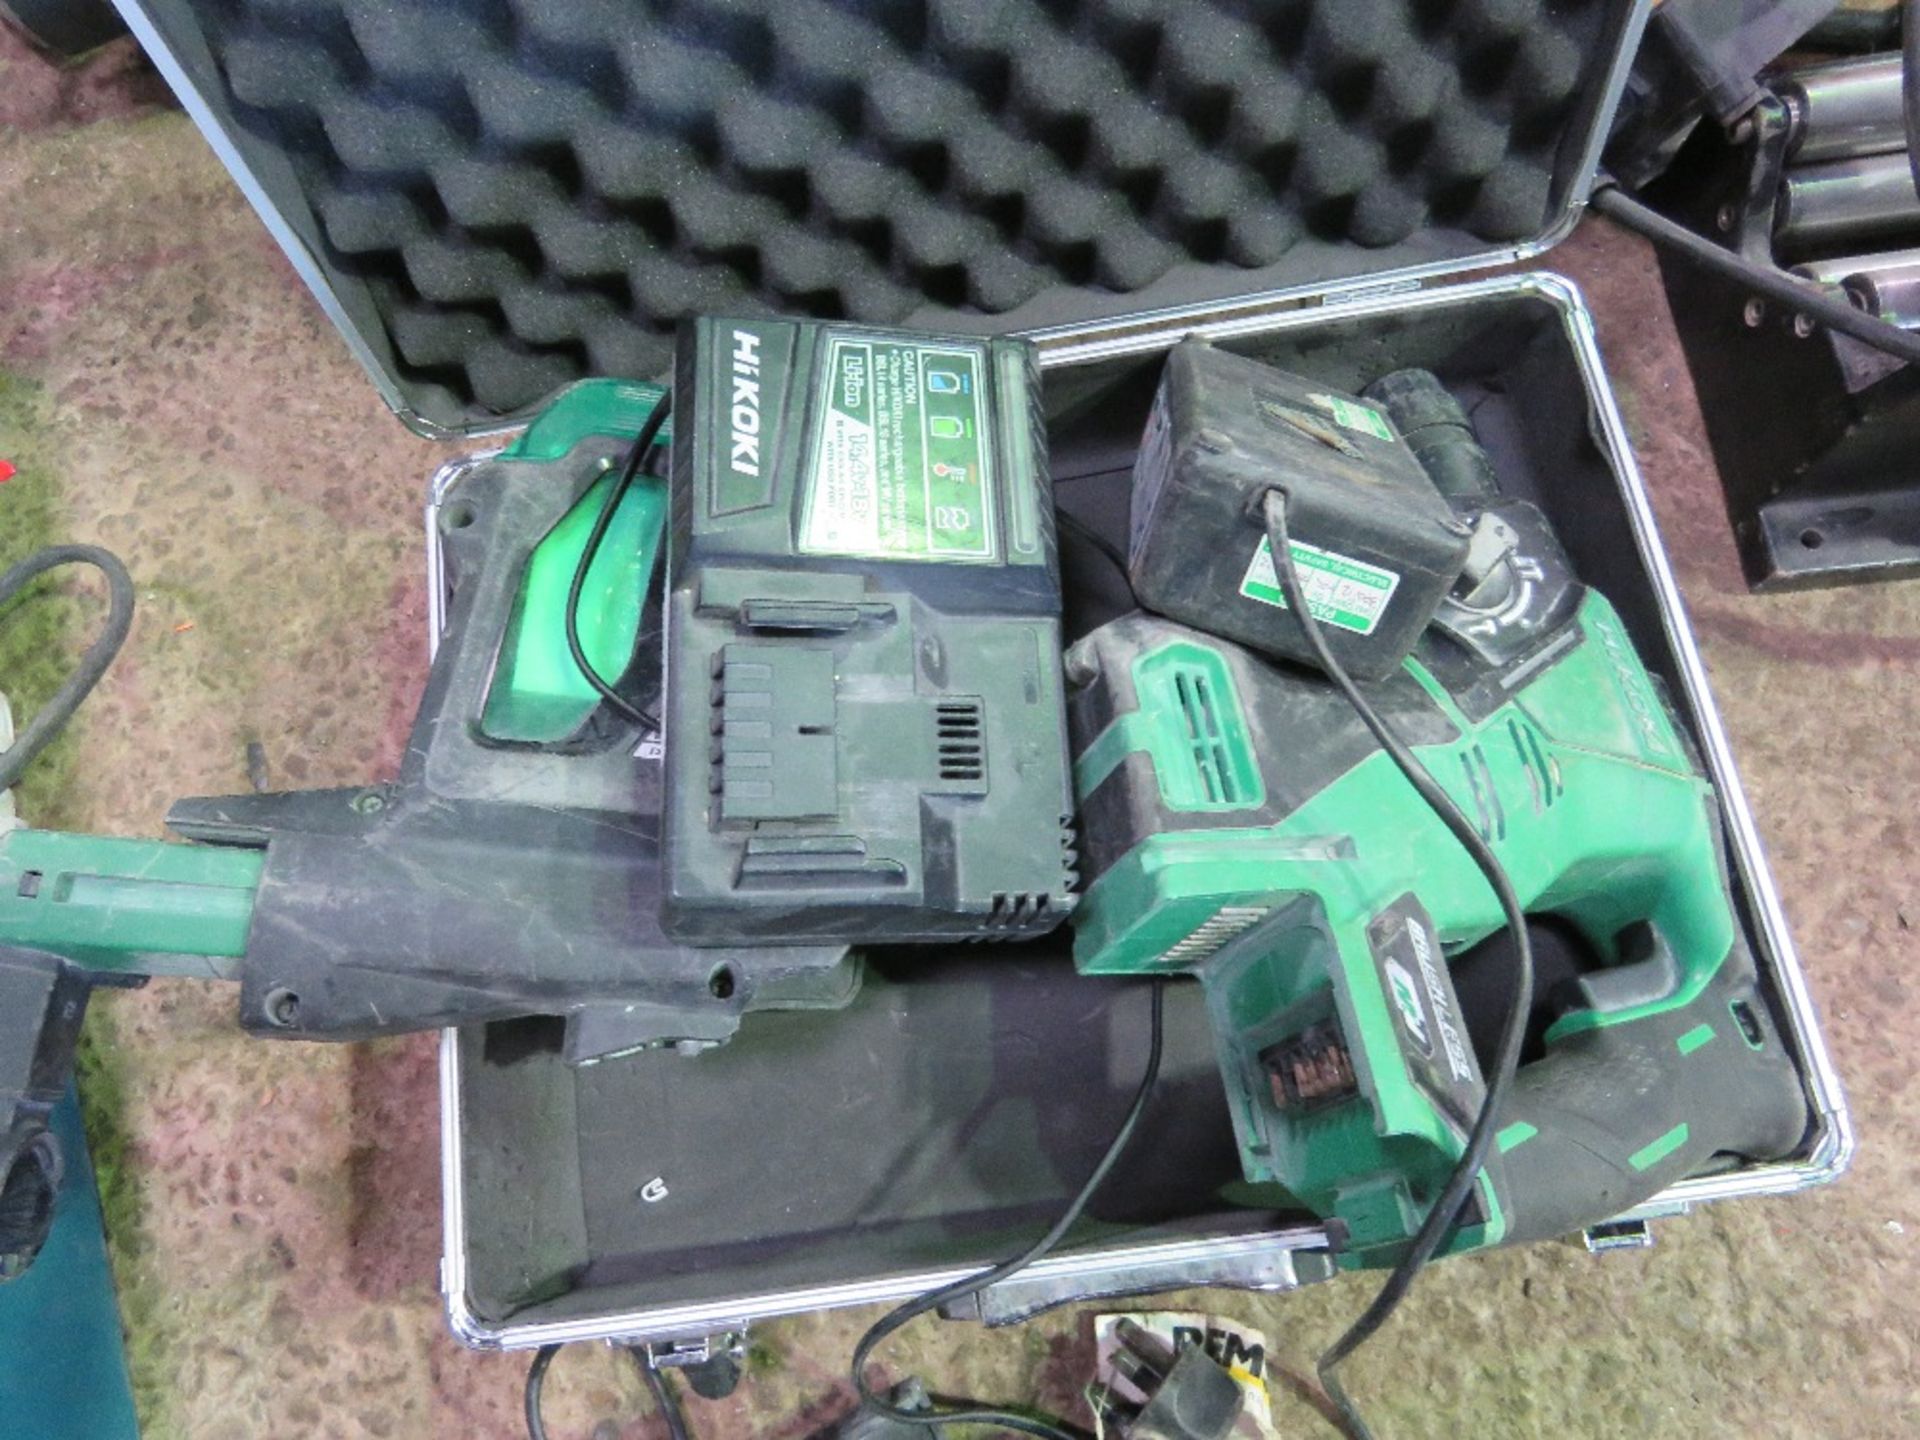 HIKOKI BATTERY DRILL AND ASSOCIATED SUNDRIES. SOURCED FROM LOCAL BUILDING COMPANY LIQUIDATION. - Image 3 of 5